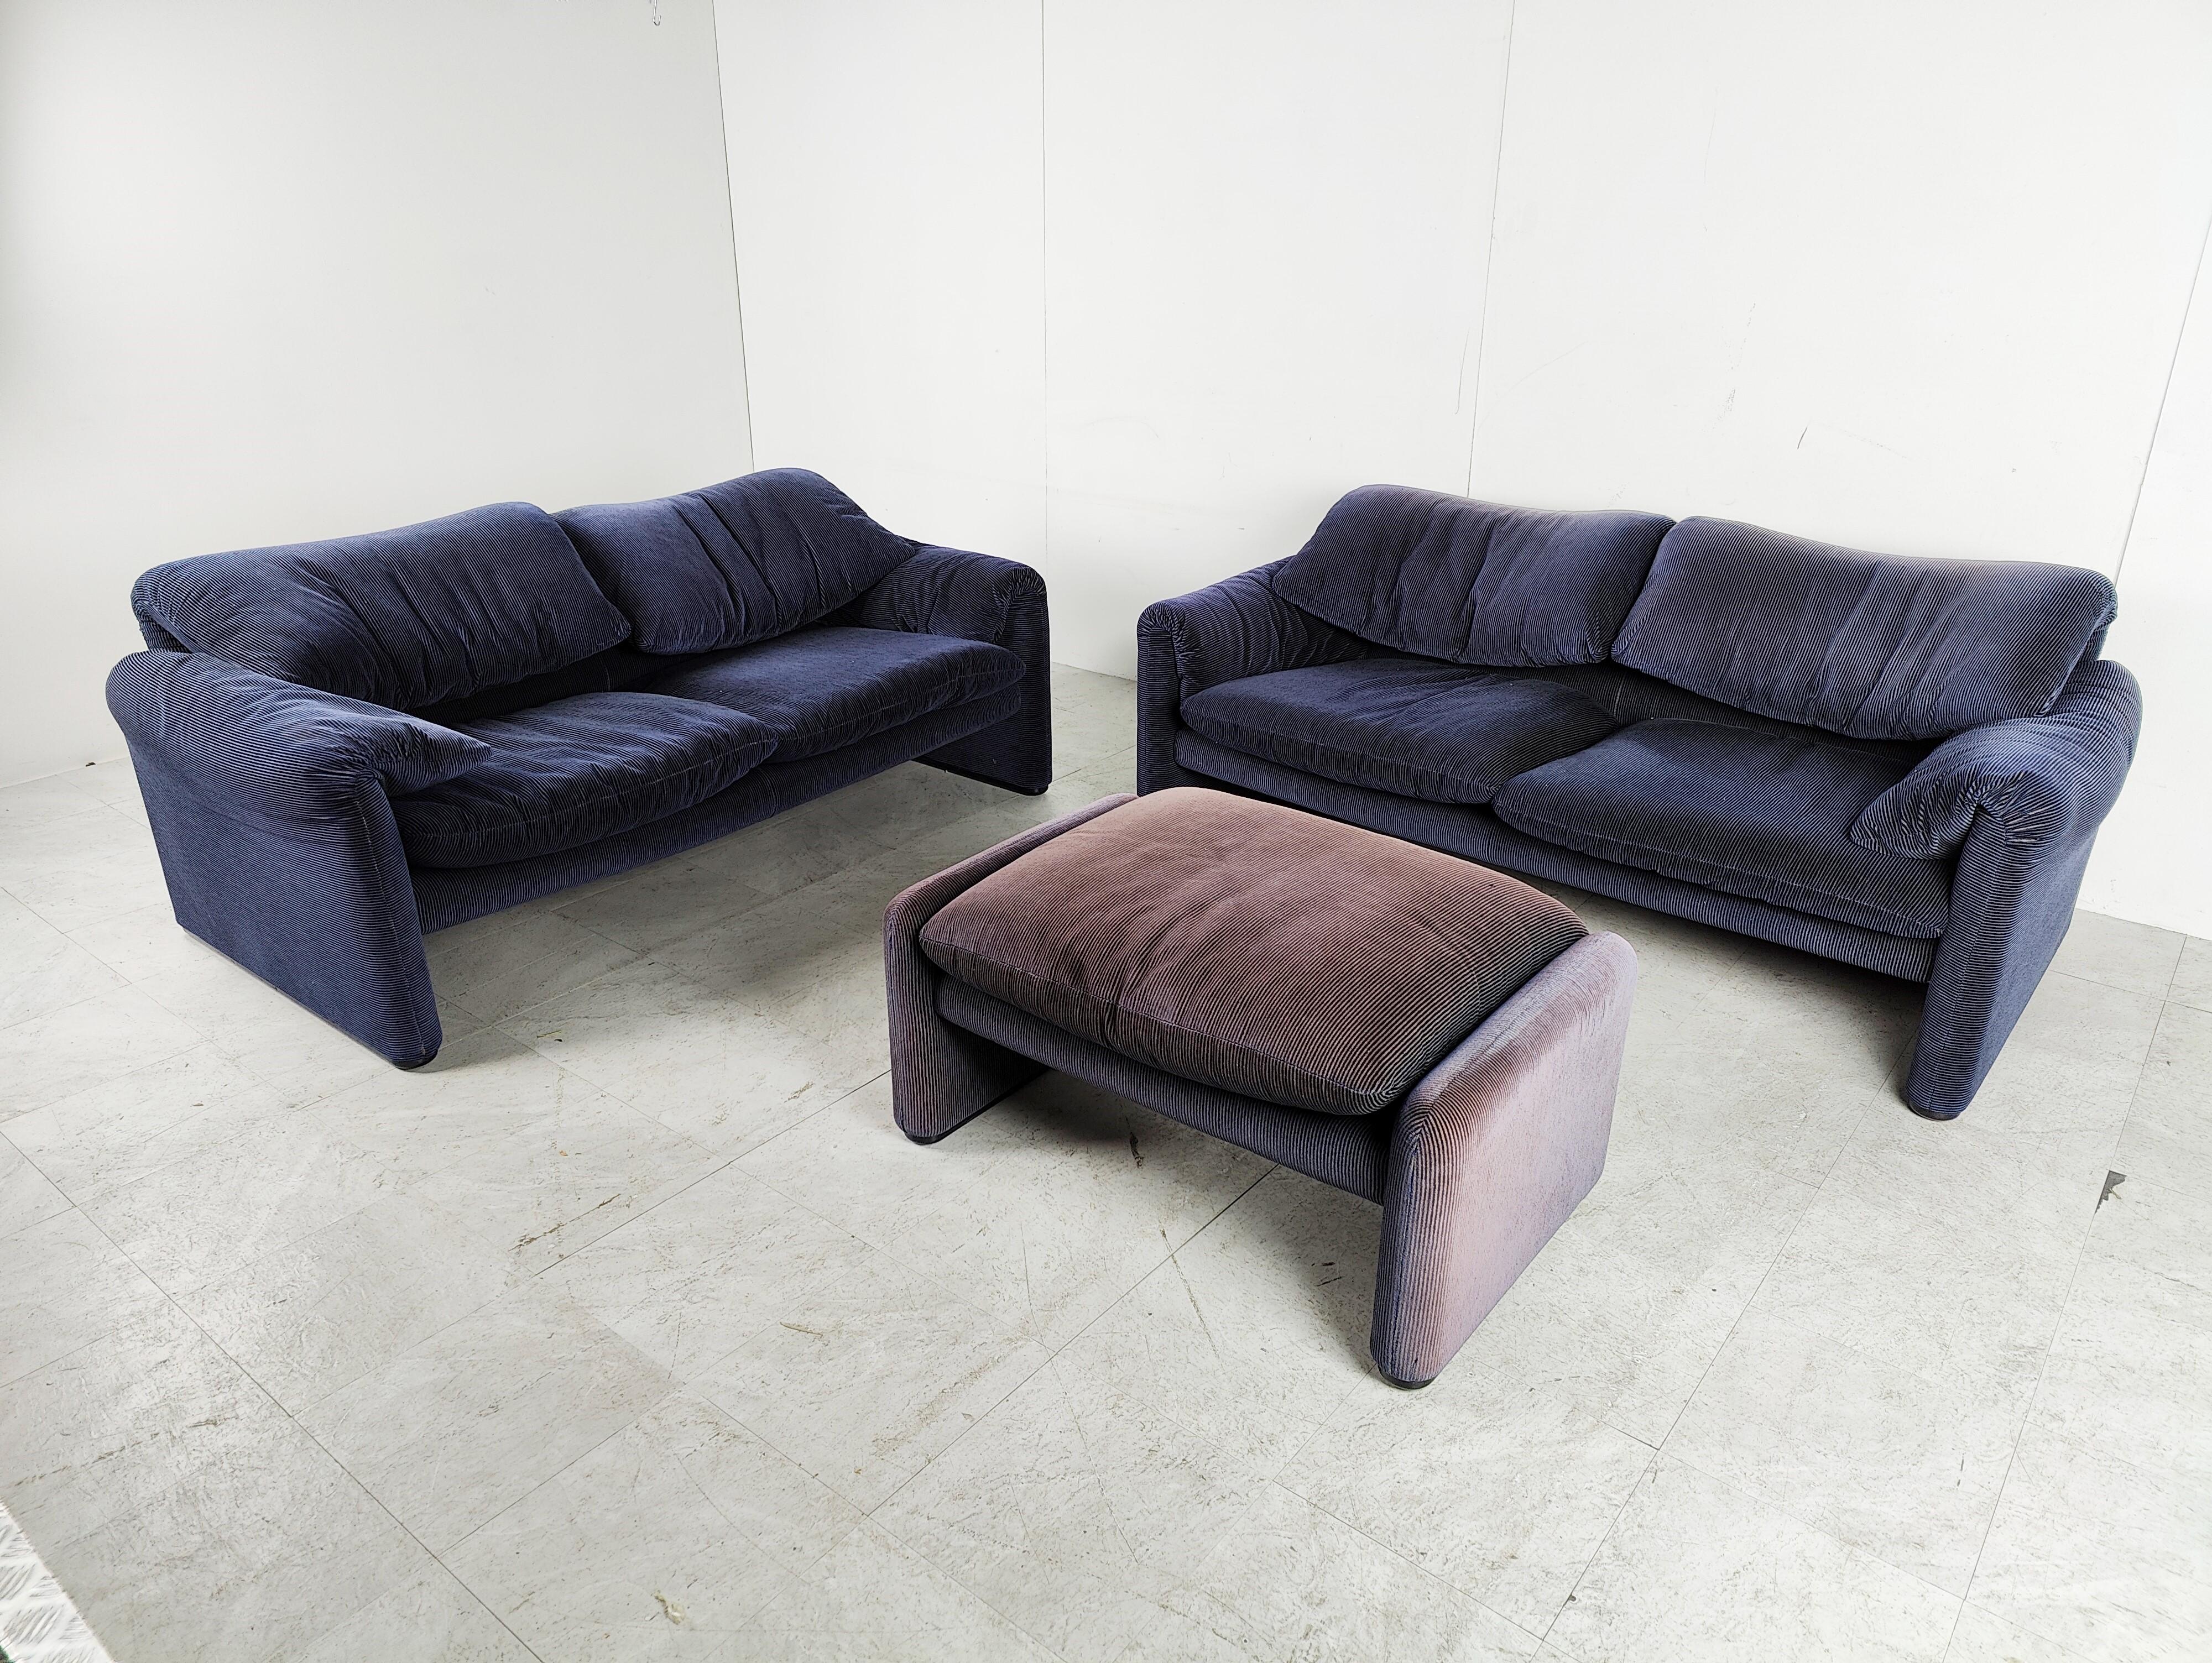 Mid-Century Modern Pair of Maralunga Sofas by Vico Magistretti for Cassina, 1970s